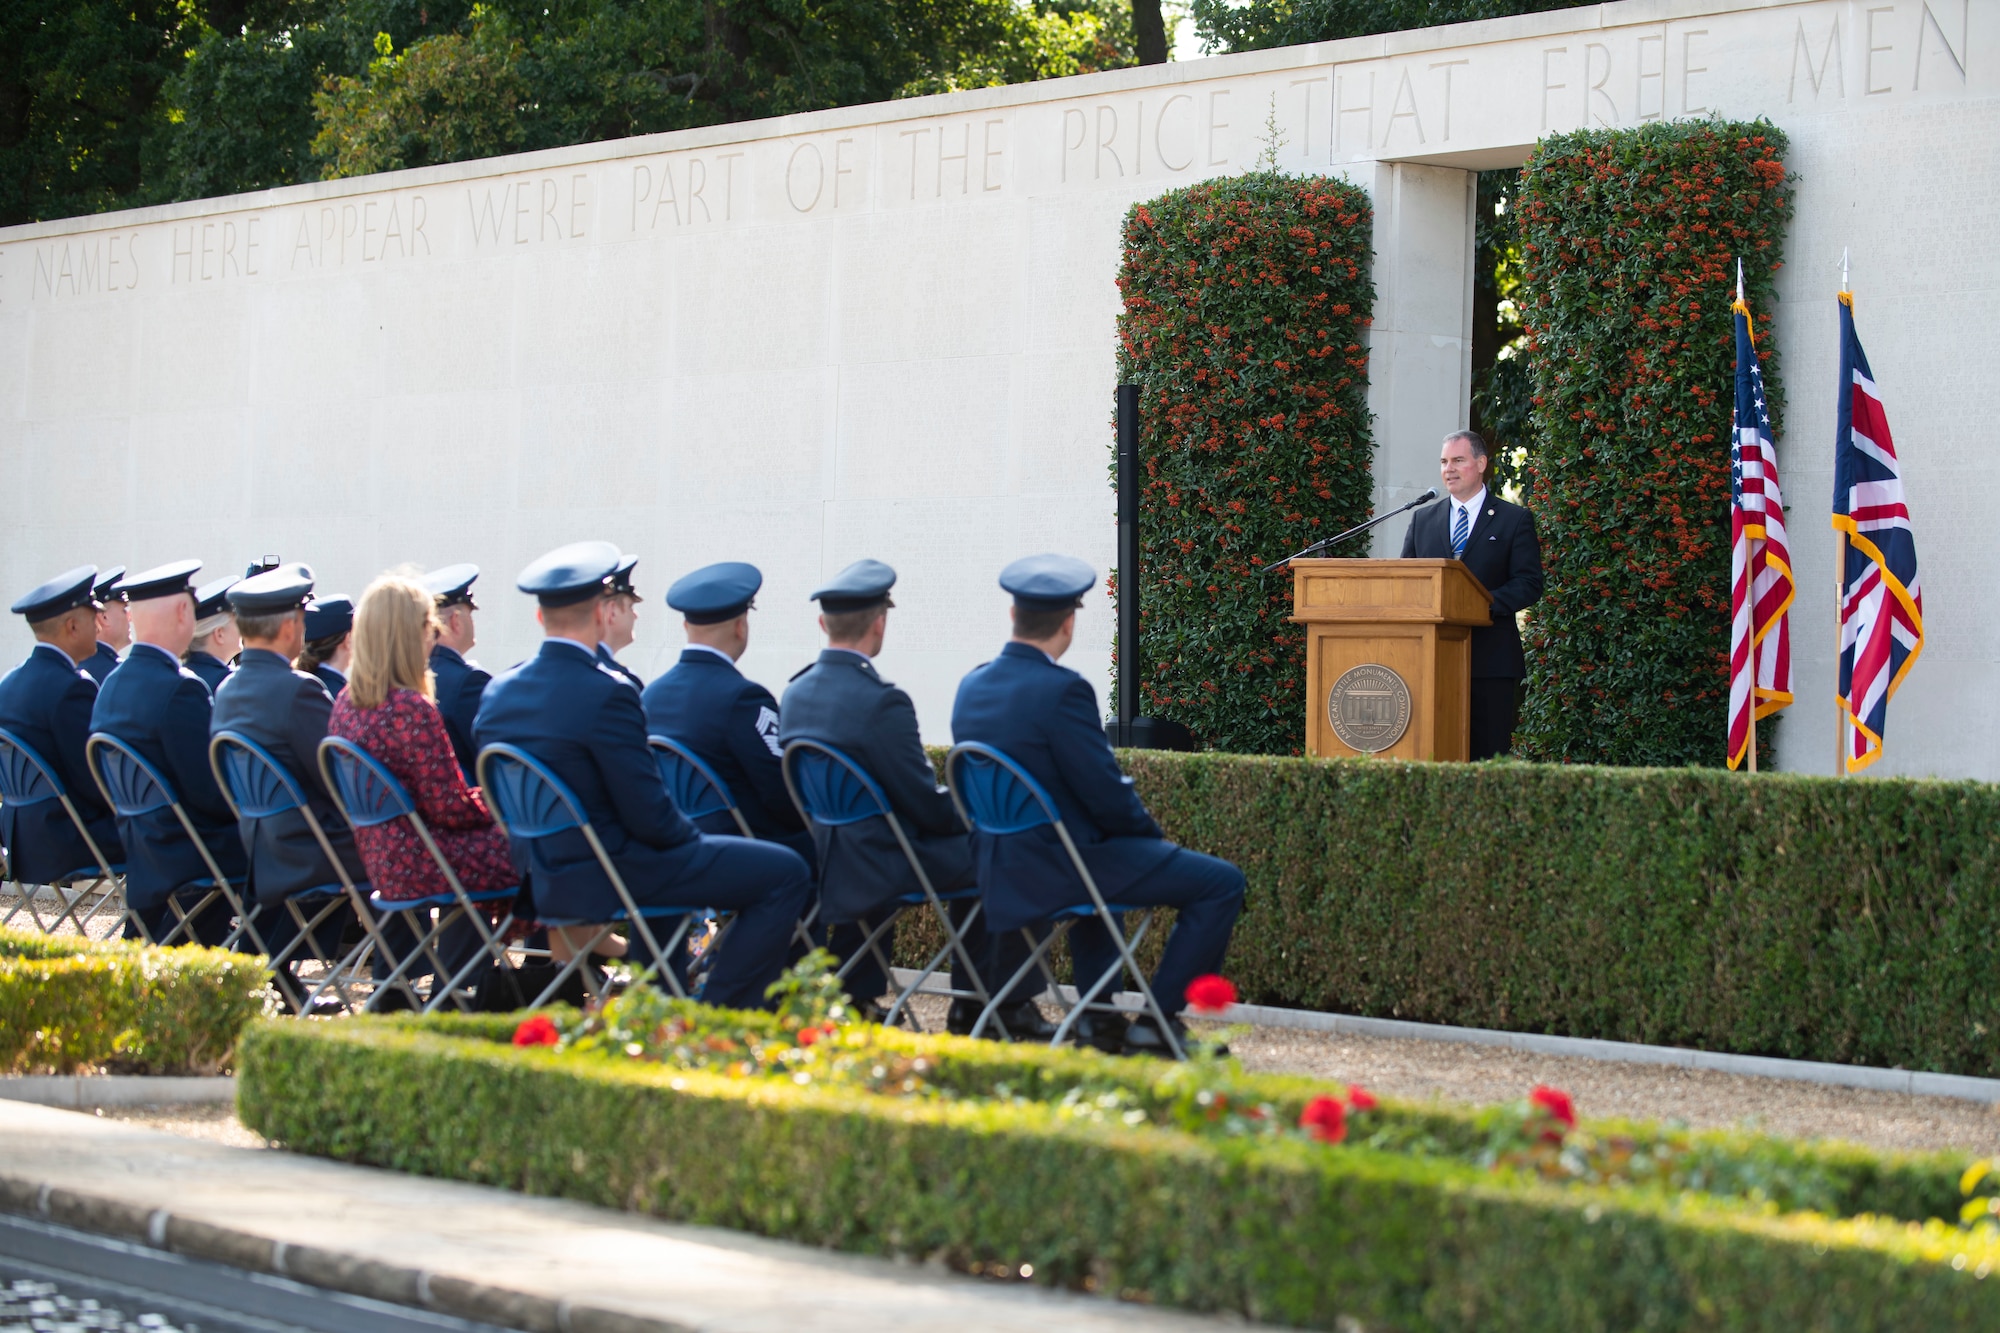 Matthew Brown, Cambridge American Cemetery superintendent, welcomes everyone to the wreath laying ceremony at the Cambridge American Cemetery and Memorial, Madingley, England, Sept. 1, 2022. Leadership from the 501st Combat Support Wing joined the 8th Air Force commander and command chief, along with other U.S. Air Force leaders, to mark the 80th Anniversary of the formation of the Mighty Eighth Air Force and to commemorate those who gave their lives in the ultimate sacrifice. (U.S. Air Force photo by Senior Airman Jennifer Zima)